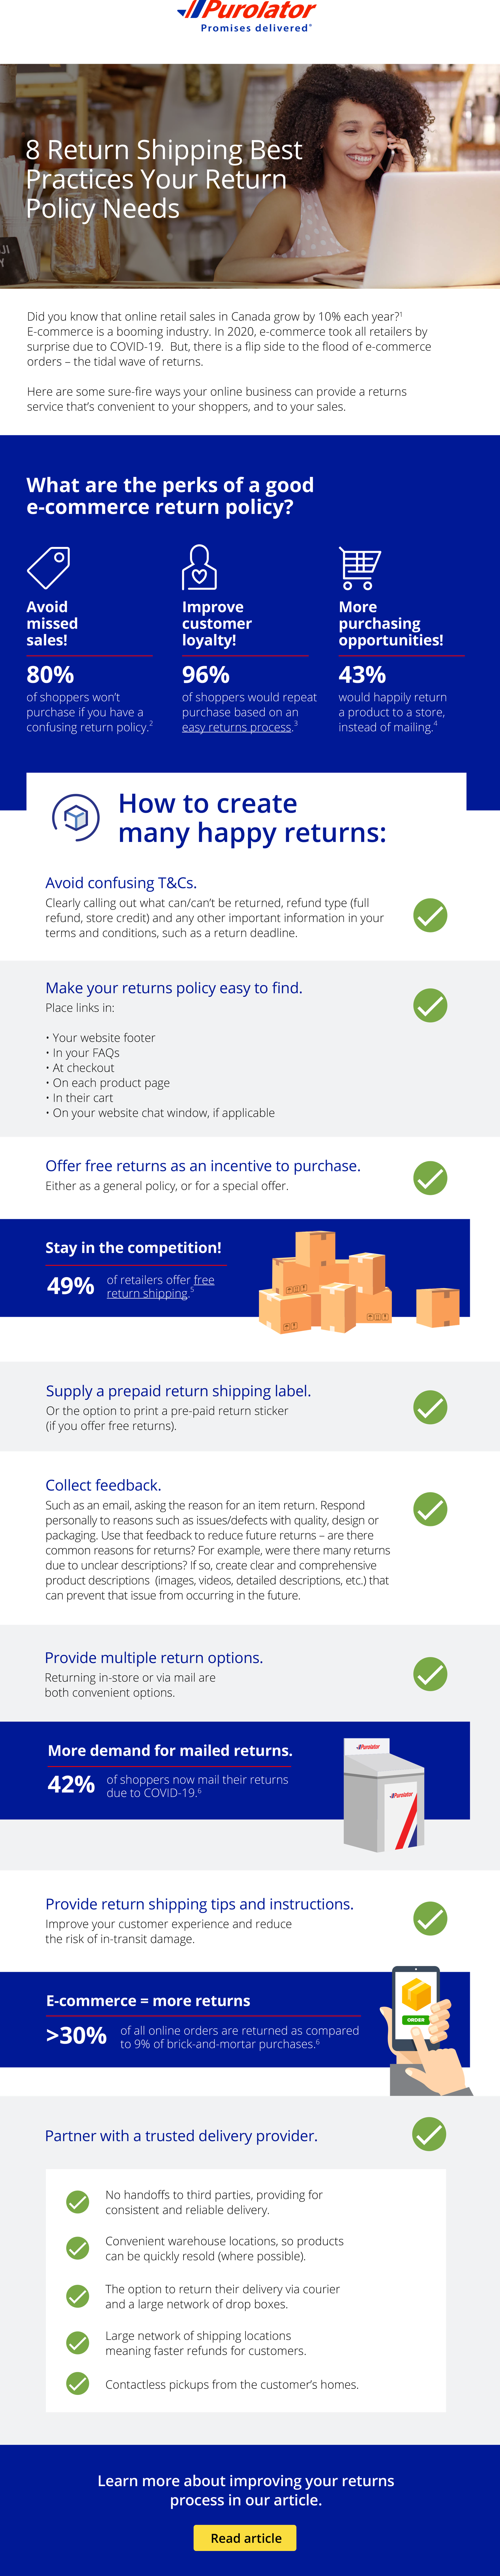 Purolator 8 returns shipping best practices your return policy needs infographic